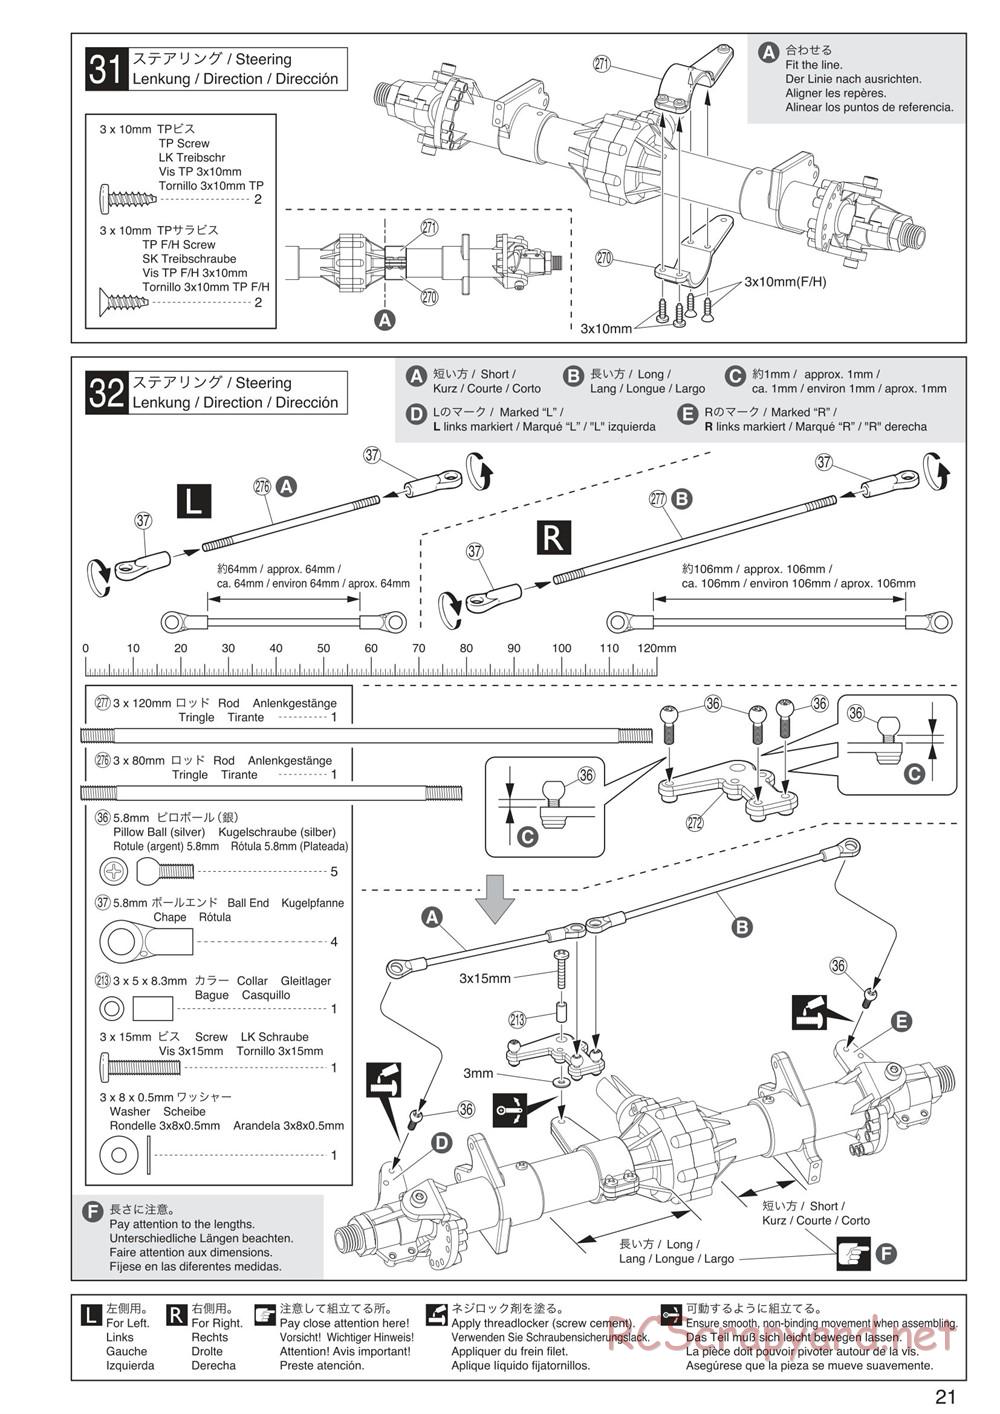 Kyosho - Mad Crusher VE - Manual - Page 21